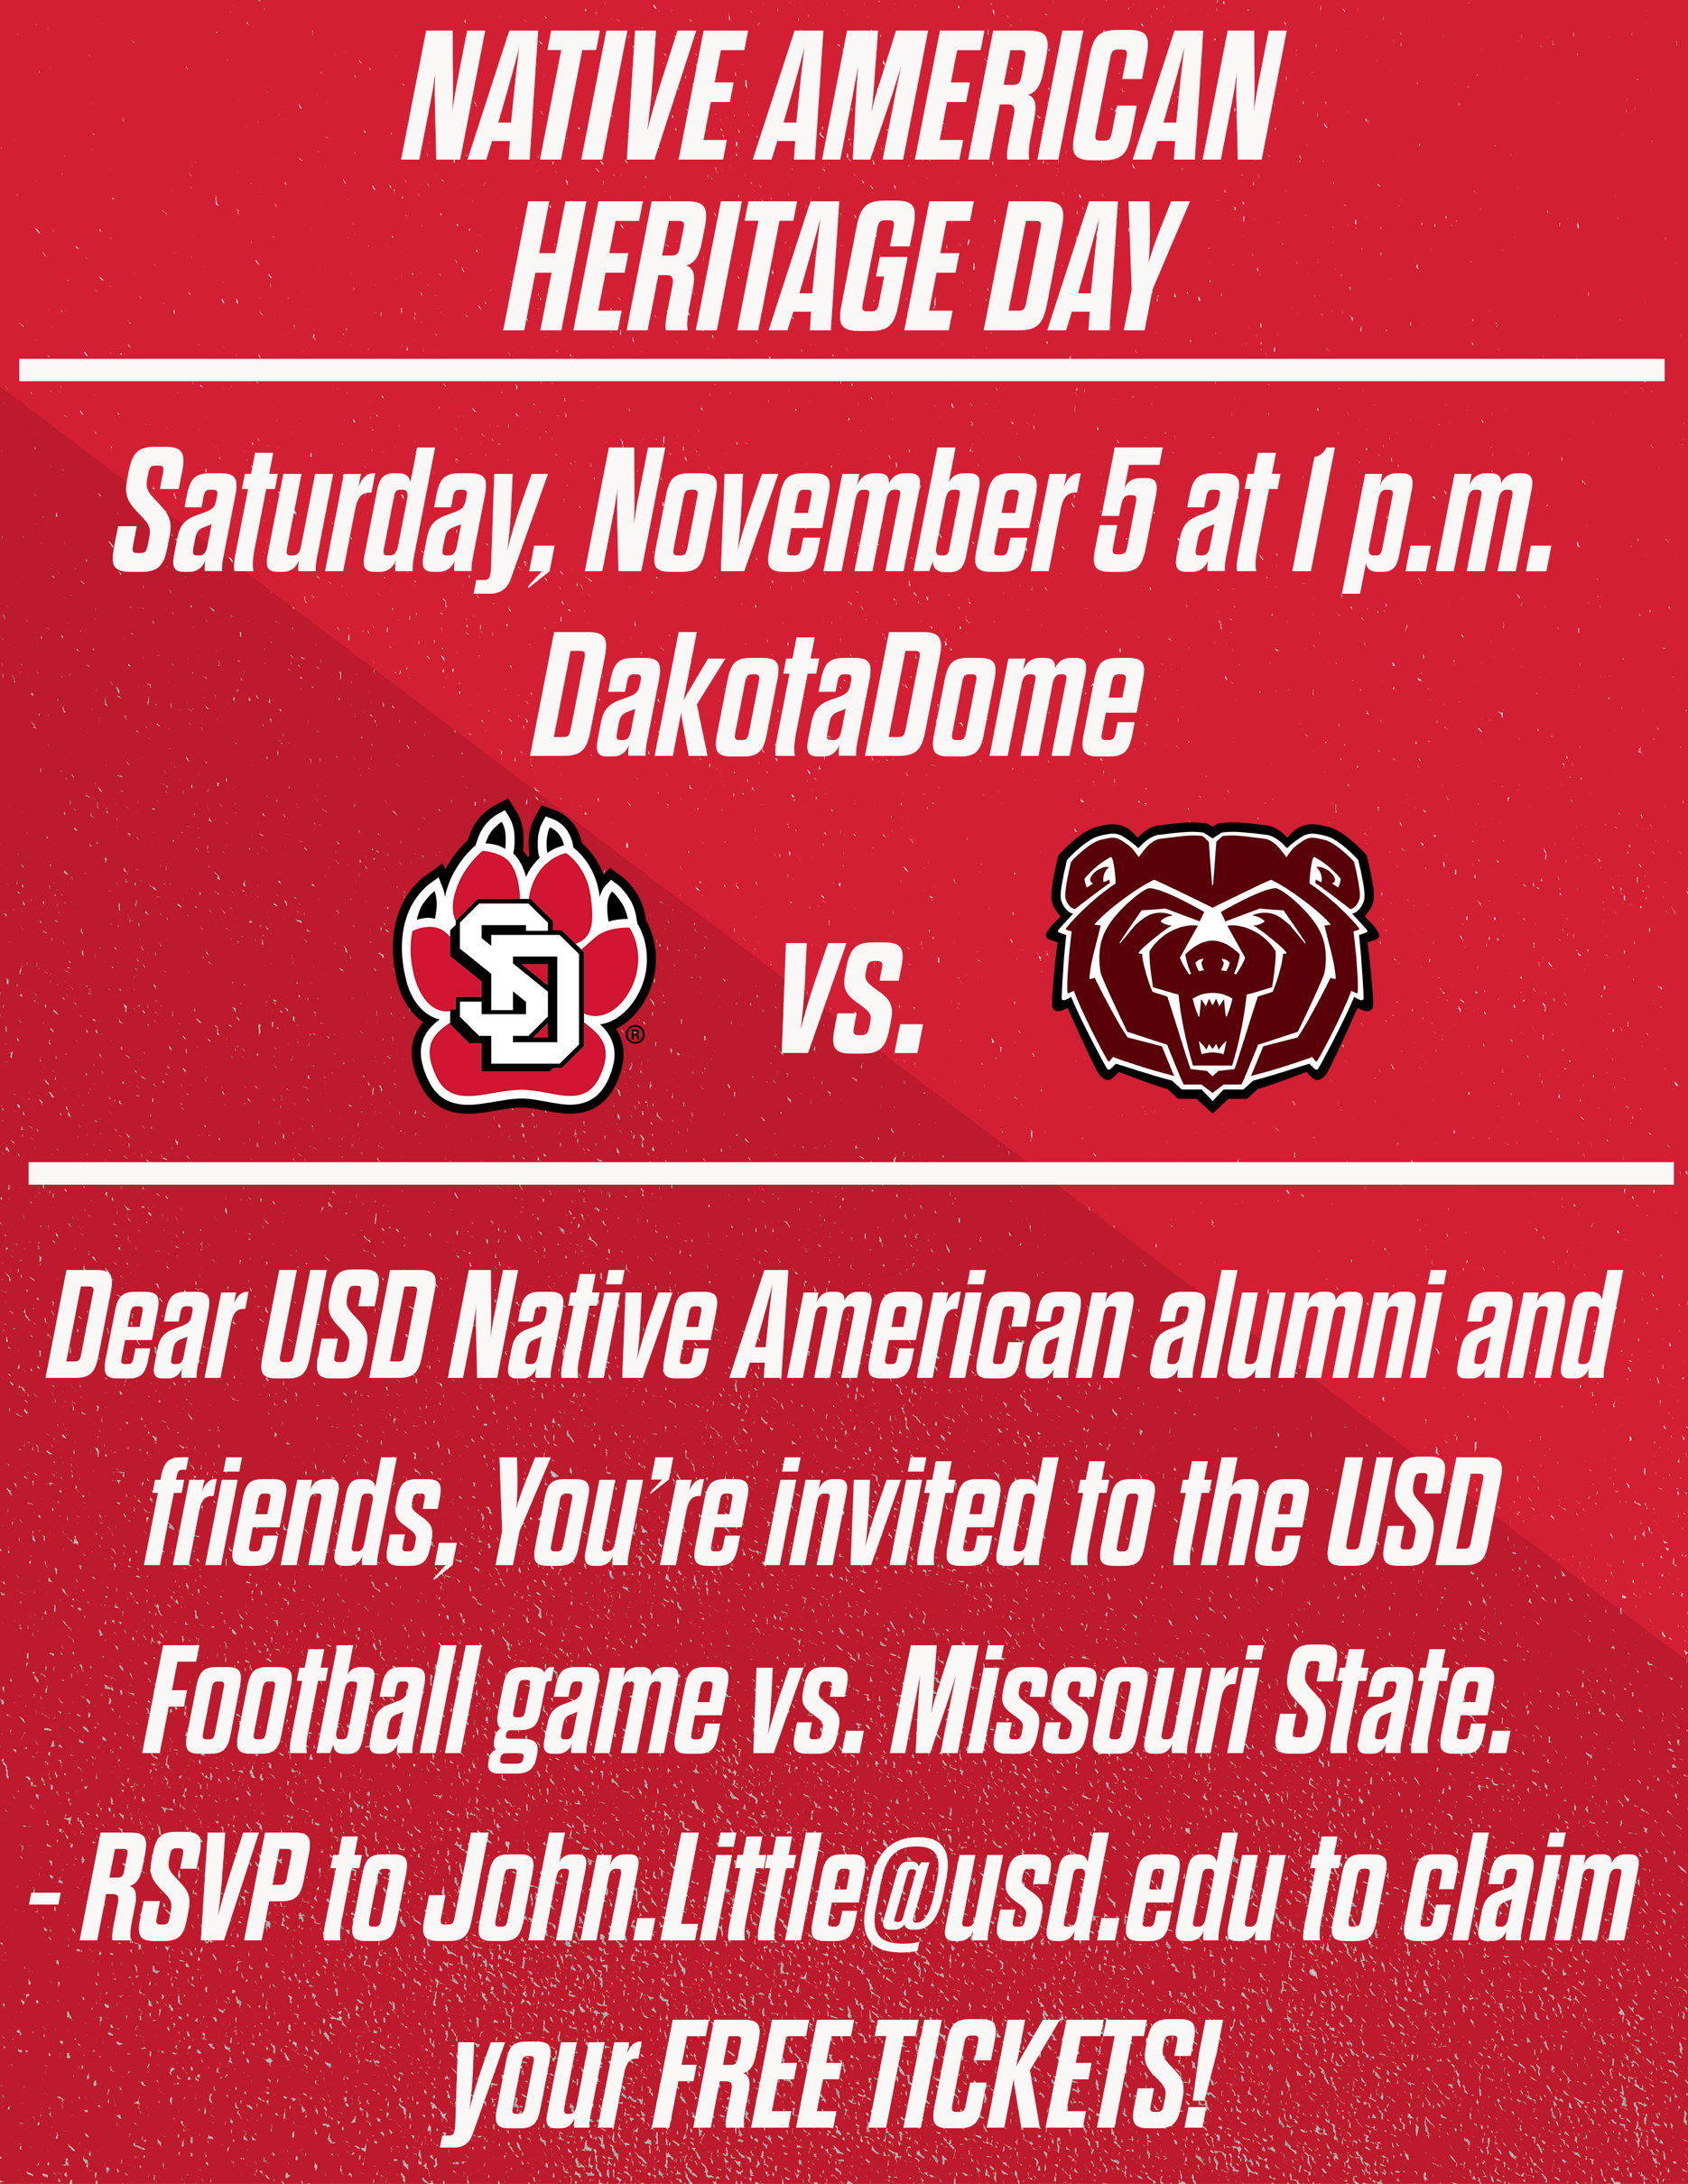 Native American Heritage Day at USD